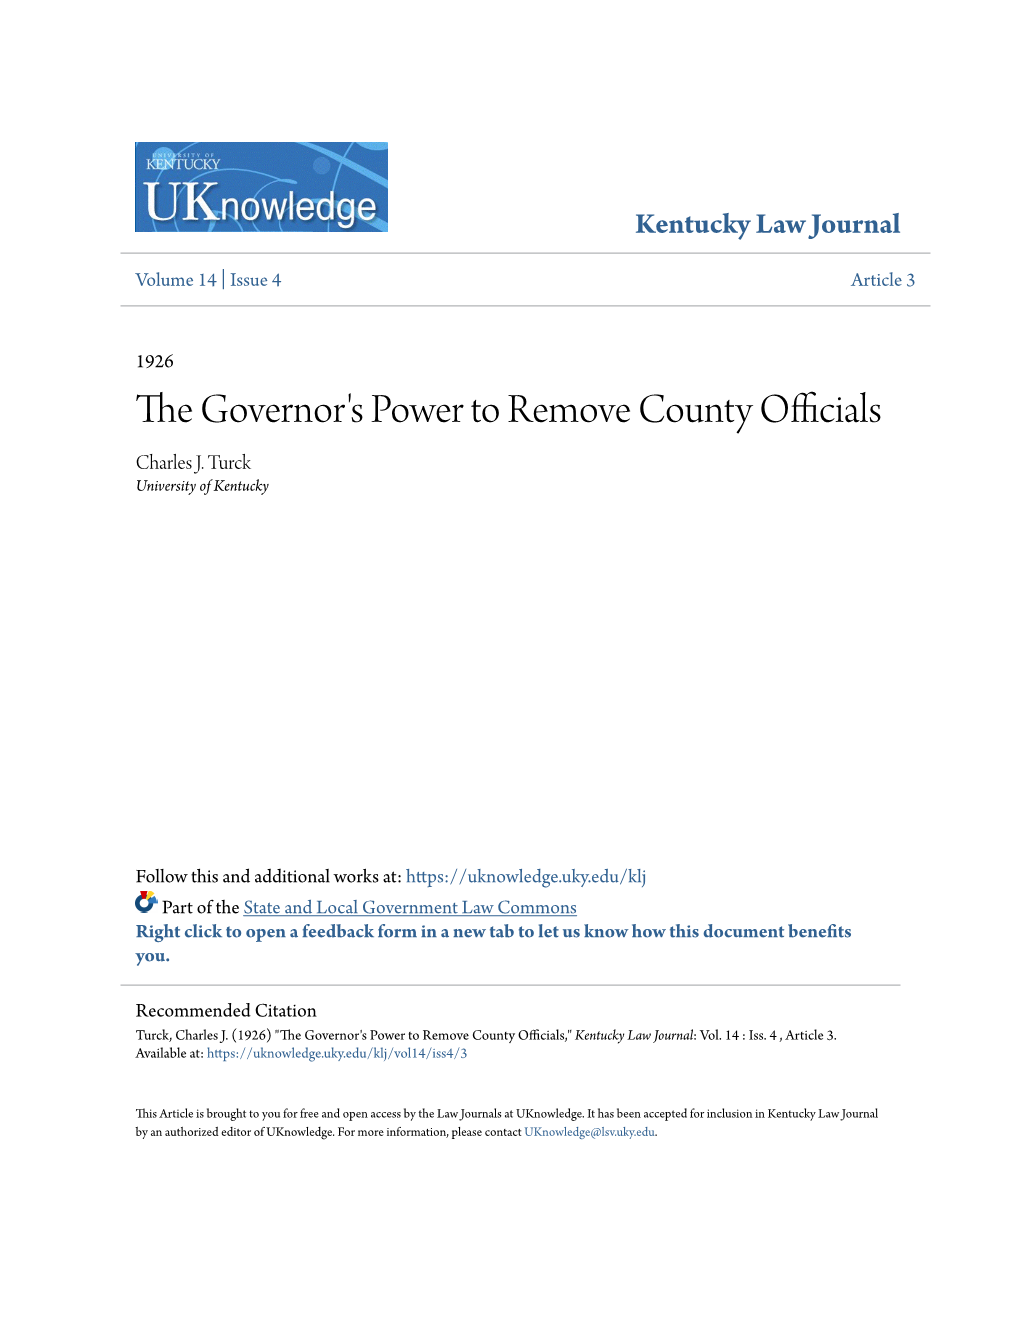 The Governor's Power to Remove County Officials Charles J